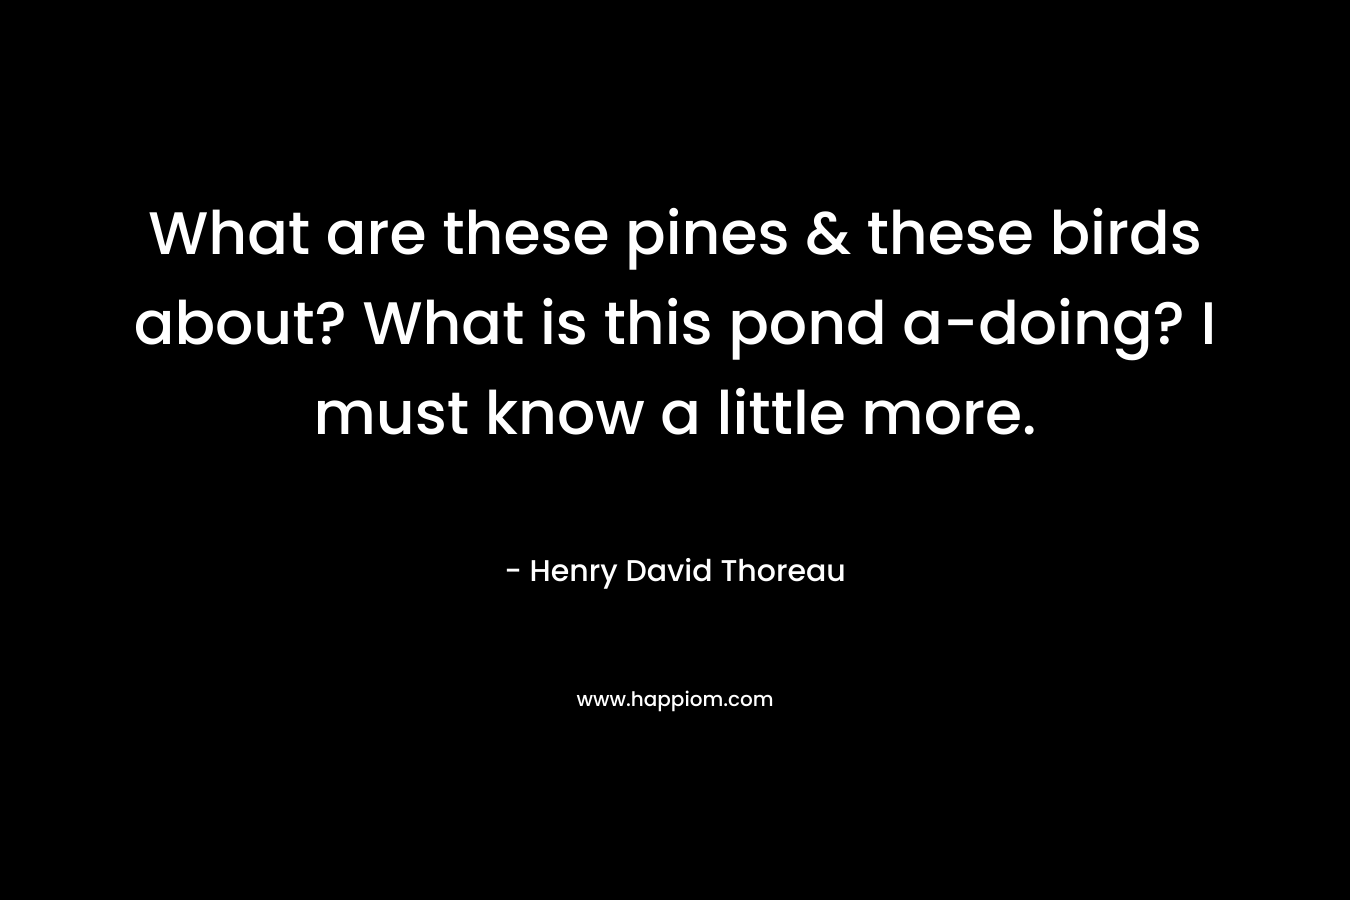 What are these pines & these birds about? What is this pond a-doing? I must know a little more. – Henry David Thoreau